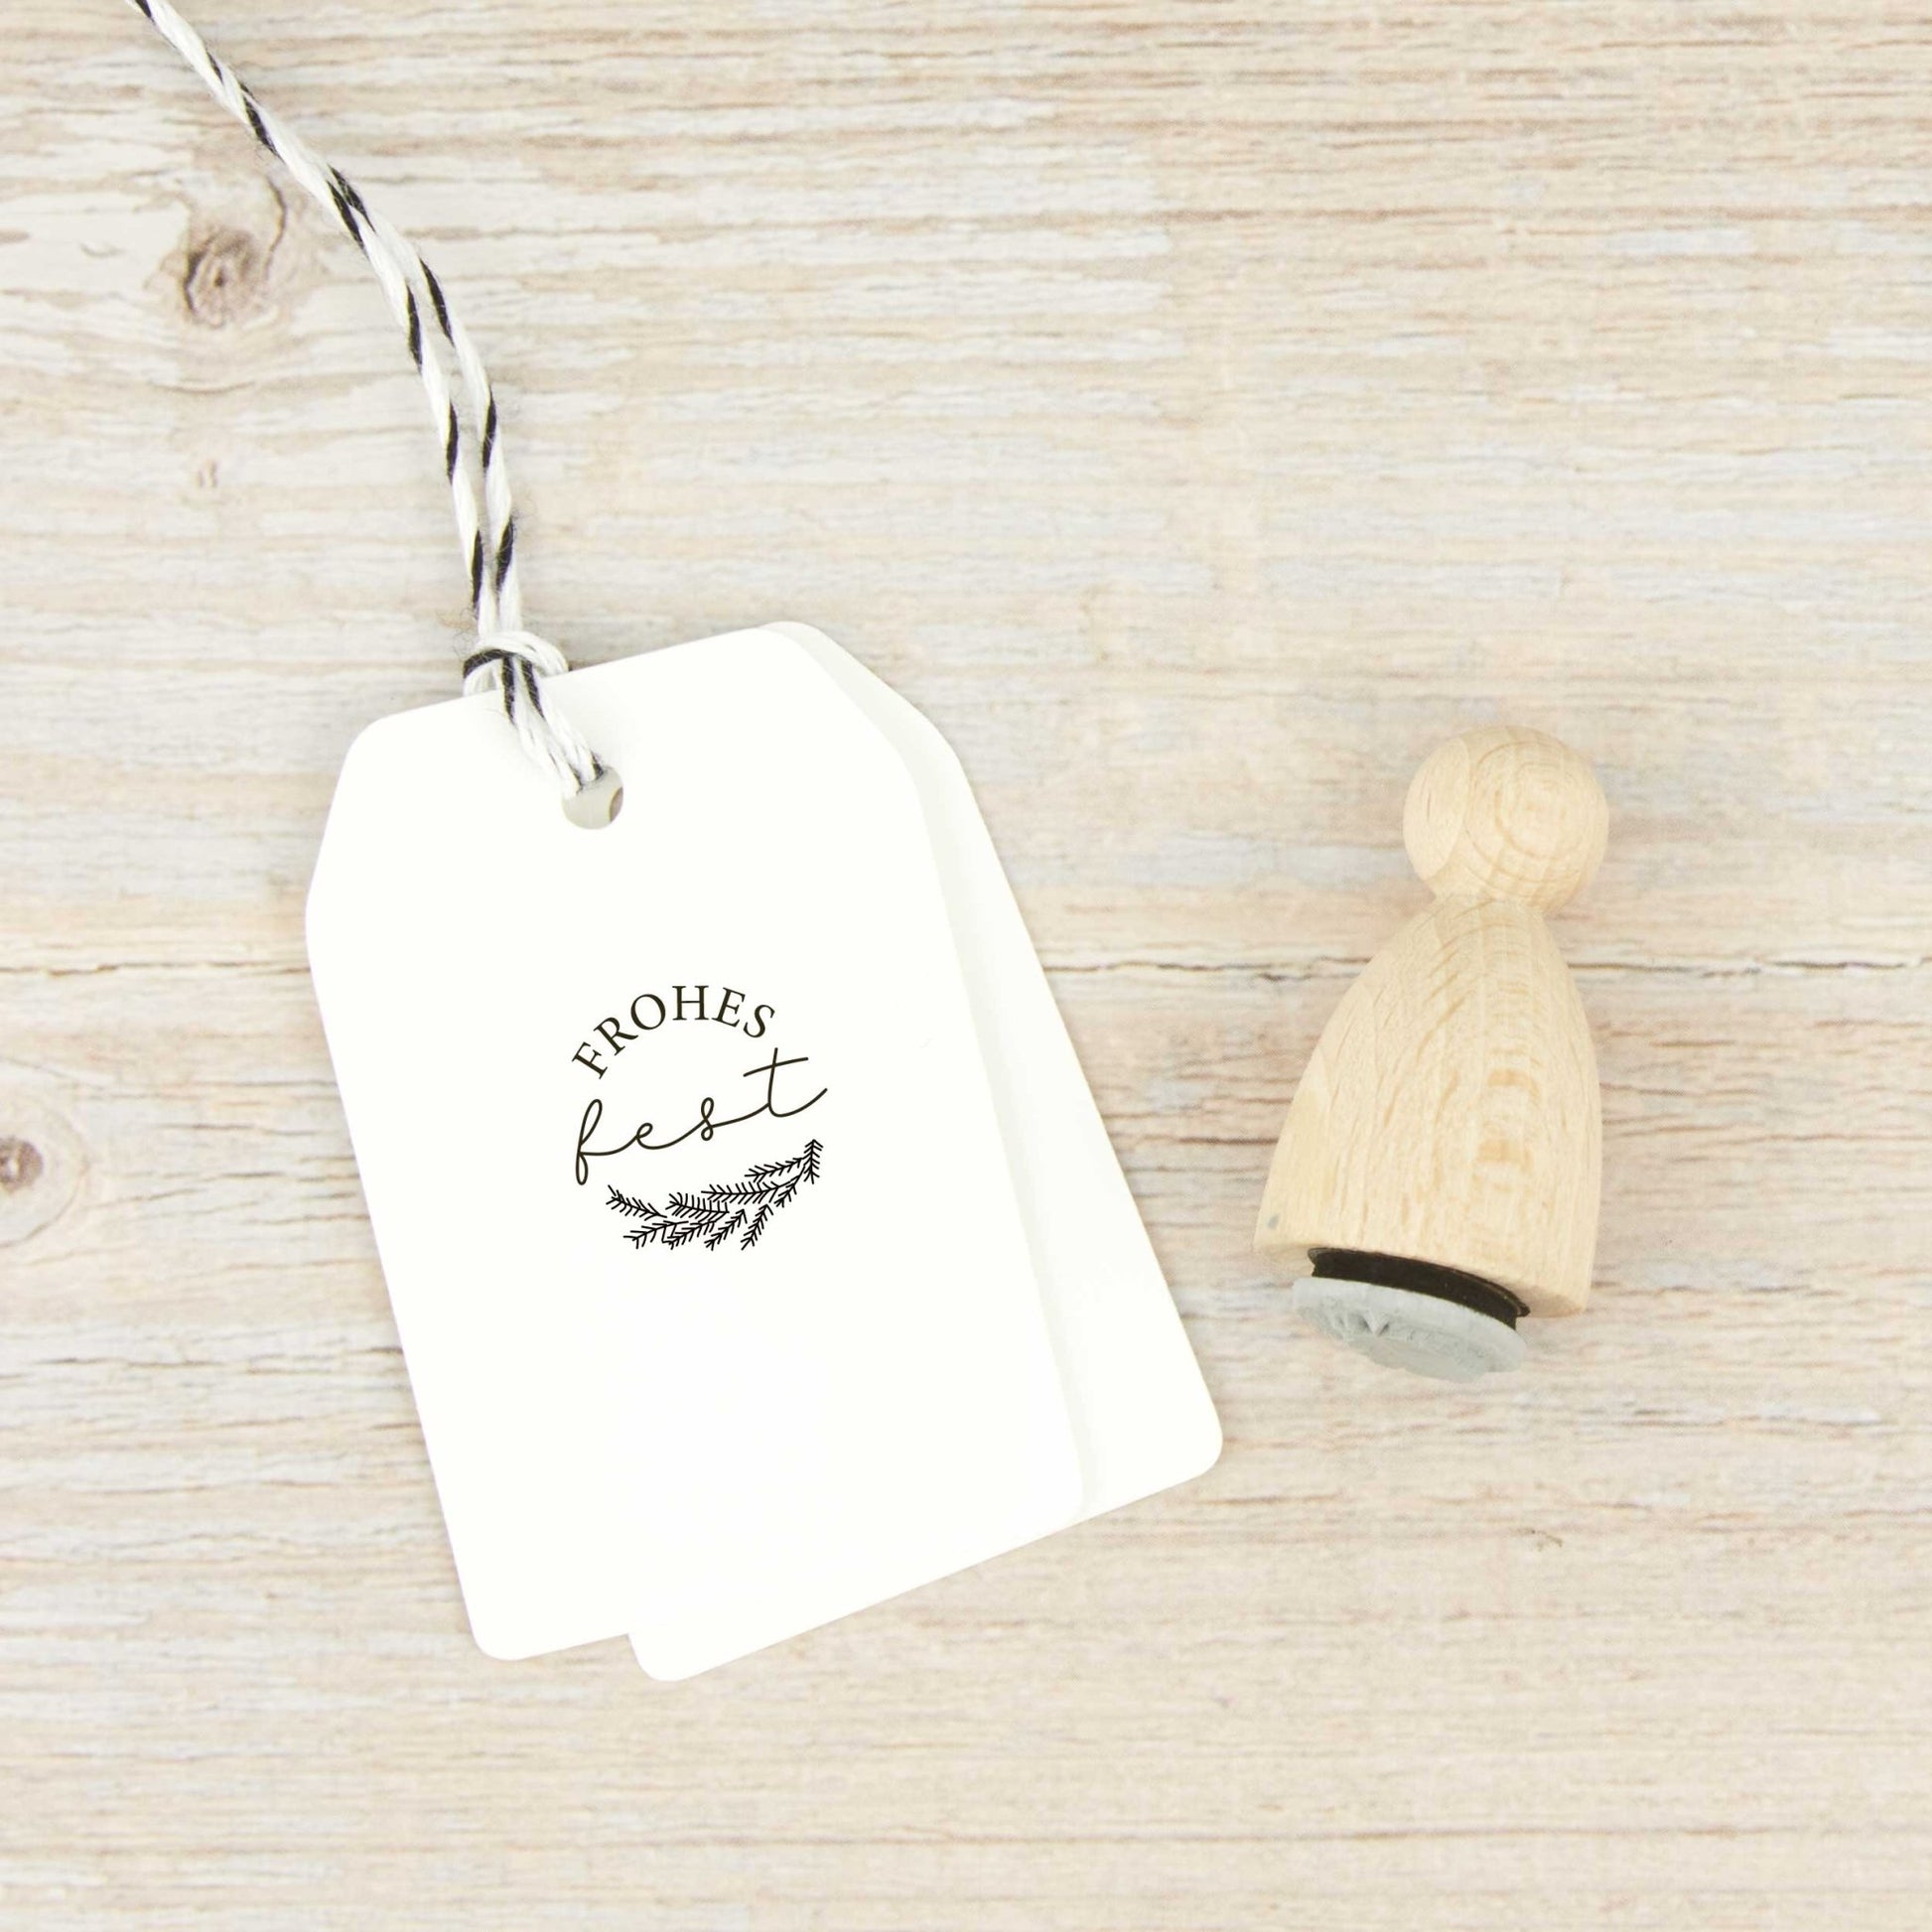 Ministempel "Frohes Fest" - IN LOVE WITH PAPER